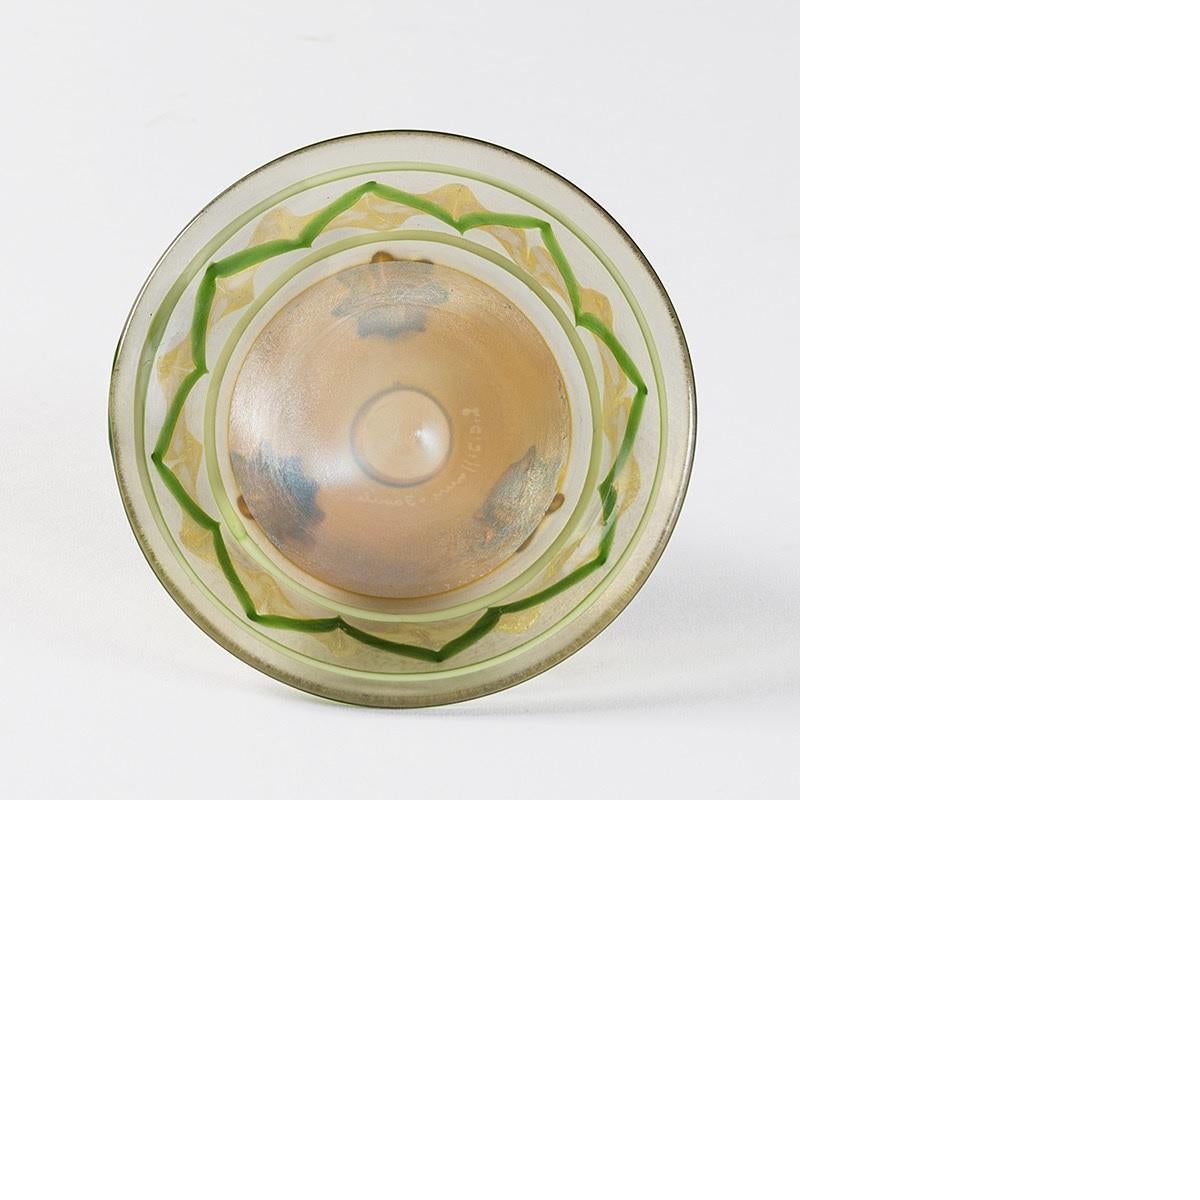 A Tiffany Studios New York Favrile glass bowl with Byzantine decoration by Louis Comfort Tiffany. 
 
This delicate translucent bowl is decorated in the colors of silver, gold and green. It sits on three gold-colored scroll-shaped glass feet, circa